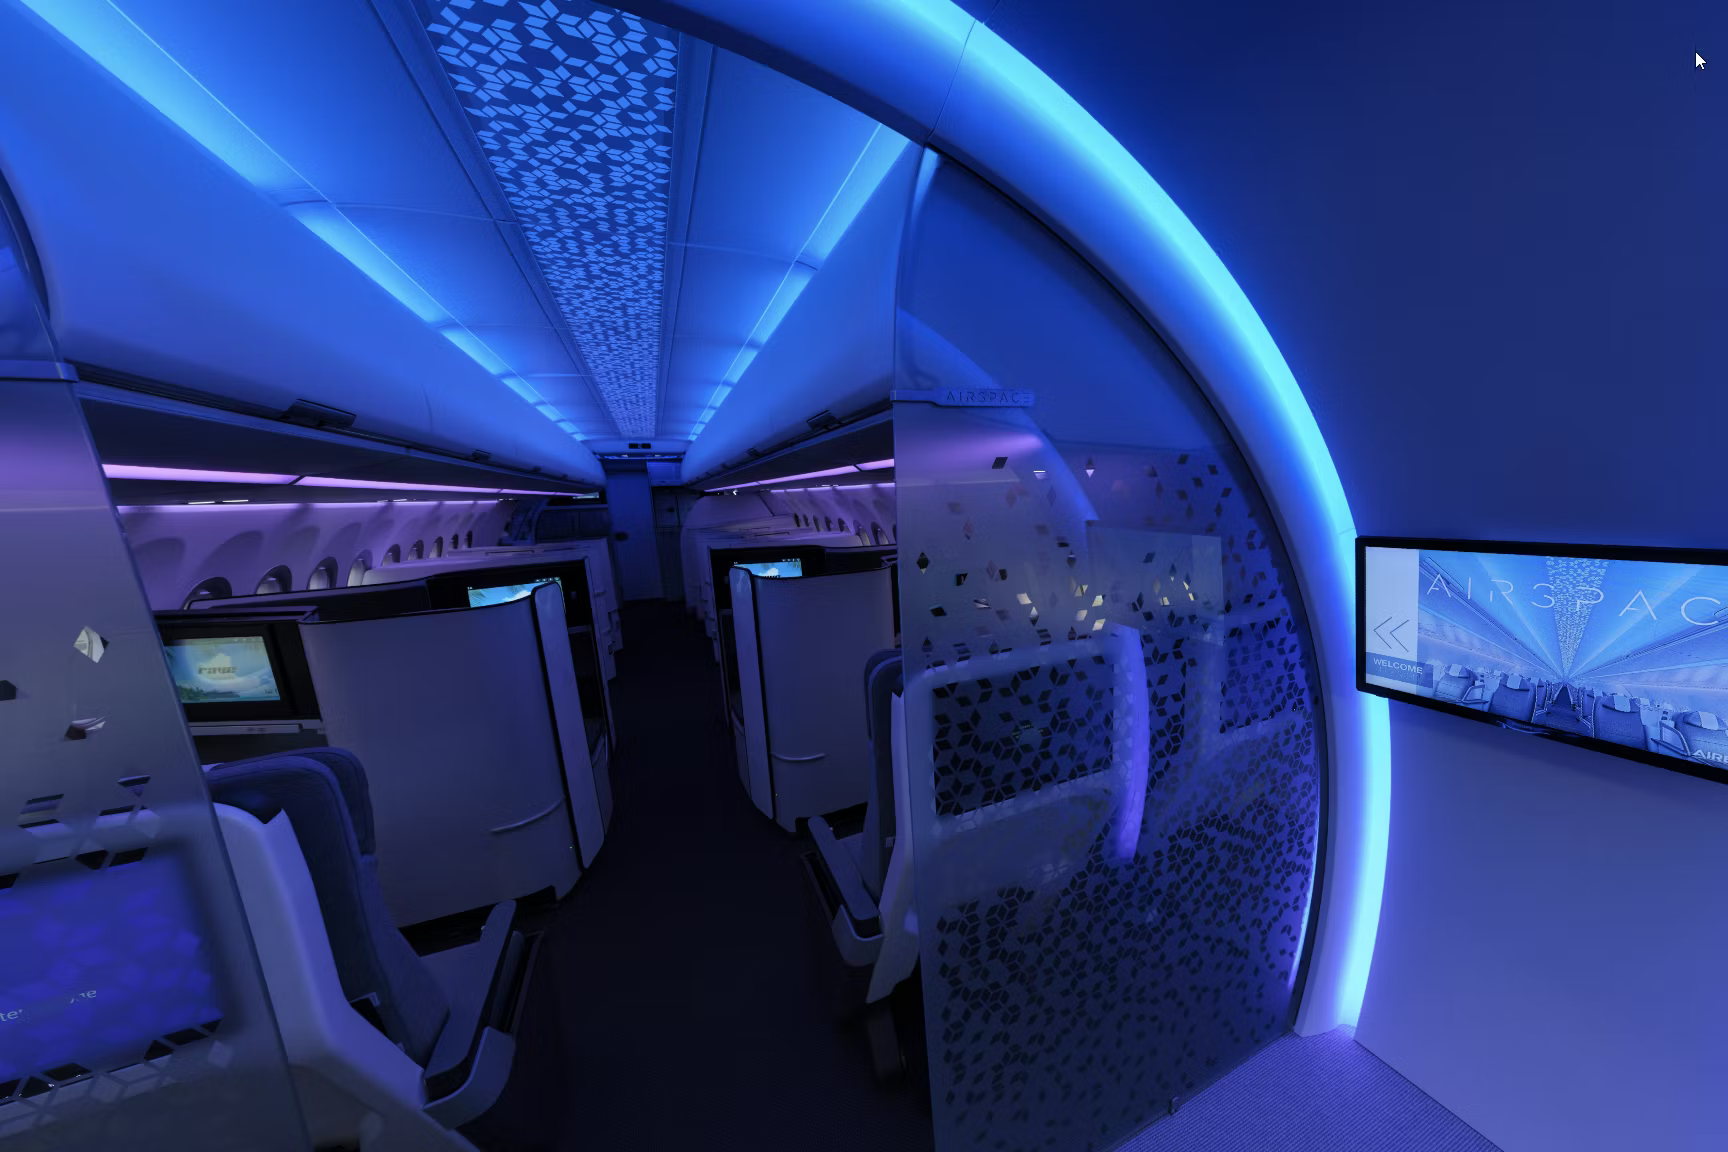 Inside the Airbus Airspace cabin demonstration.